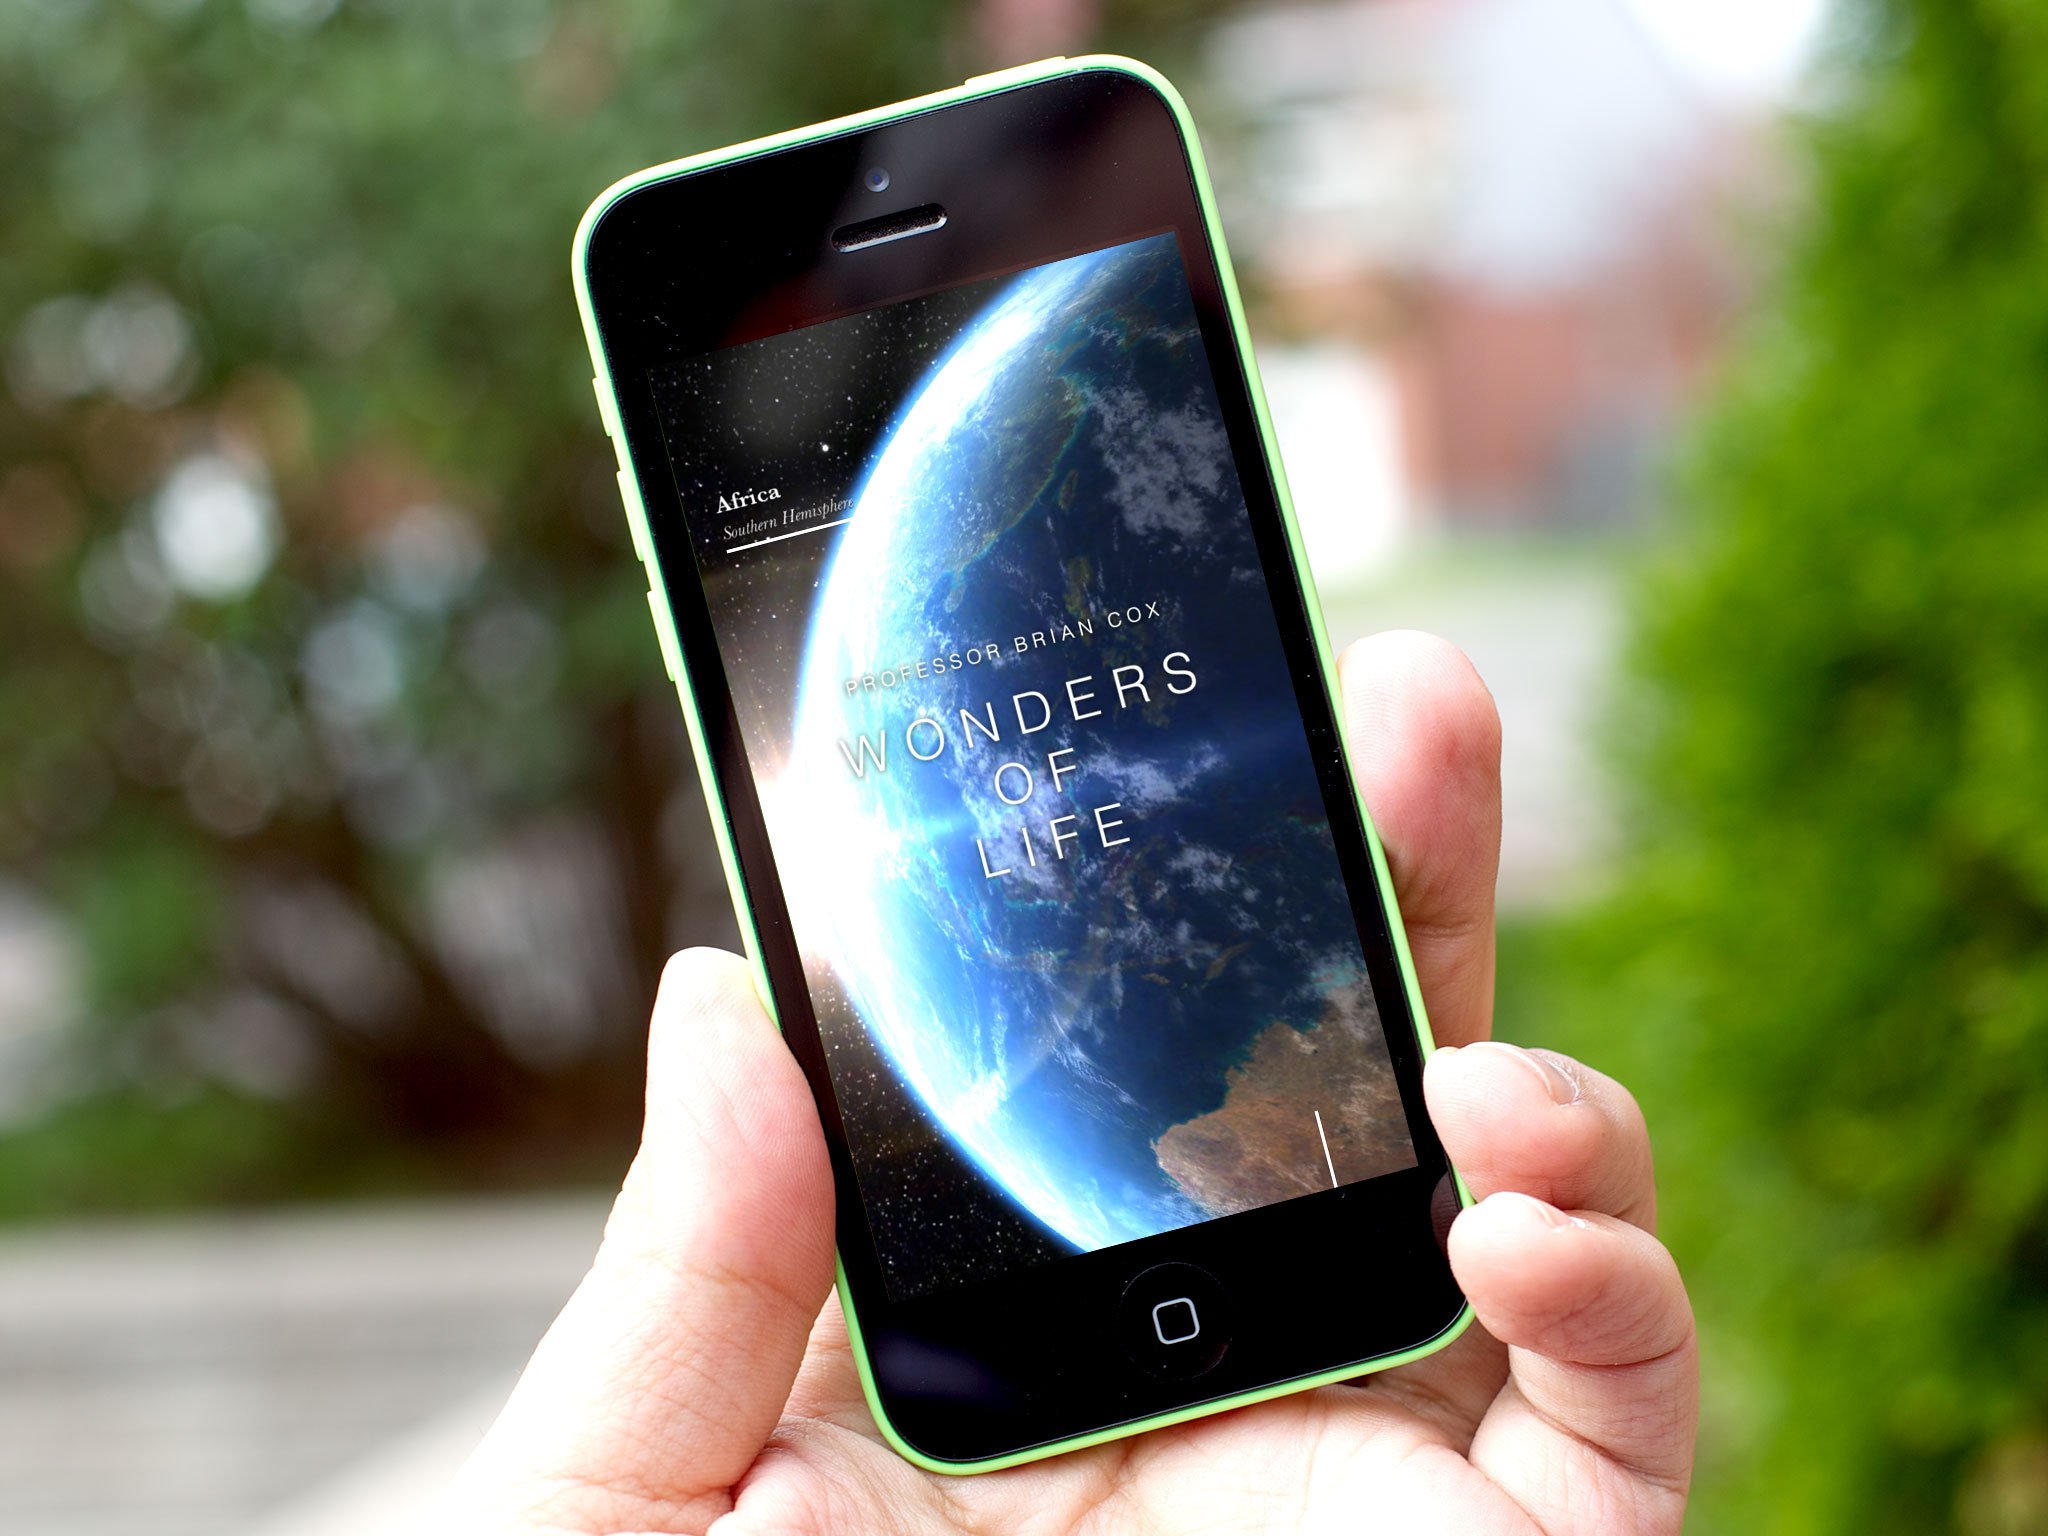 Brian Cox's Wonders of Life lets you hold the glories of nature in your hands